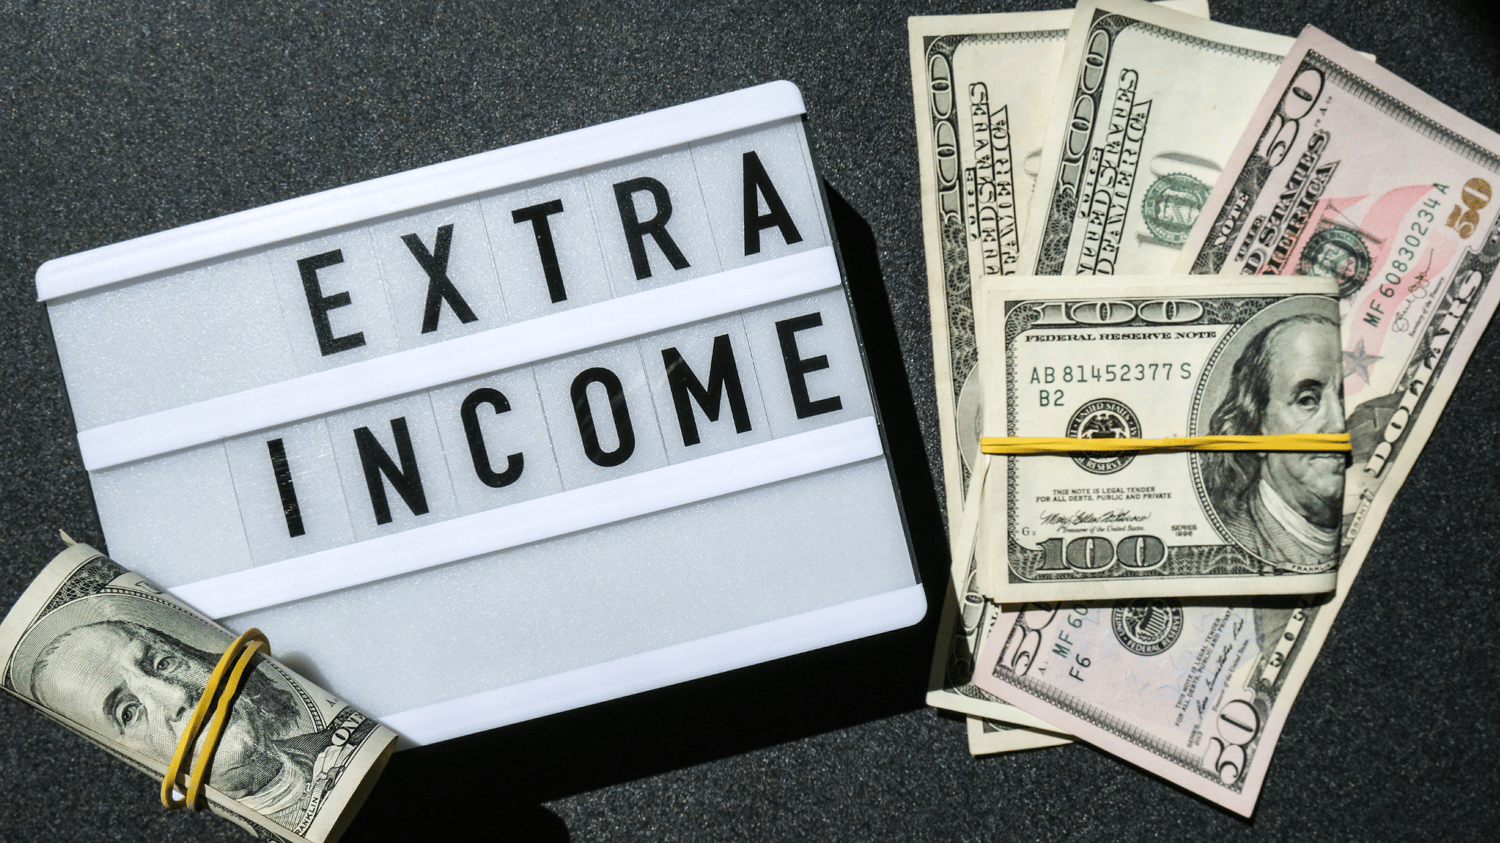 MAXIMIZE YOUR EARNINGS - 5 WAYS TO TURN YOUR EXPERTISE INTO ADDITIONAL INCOME STREAMS